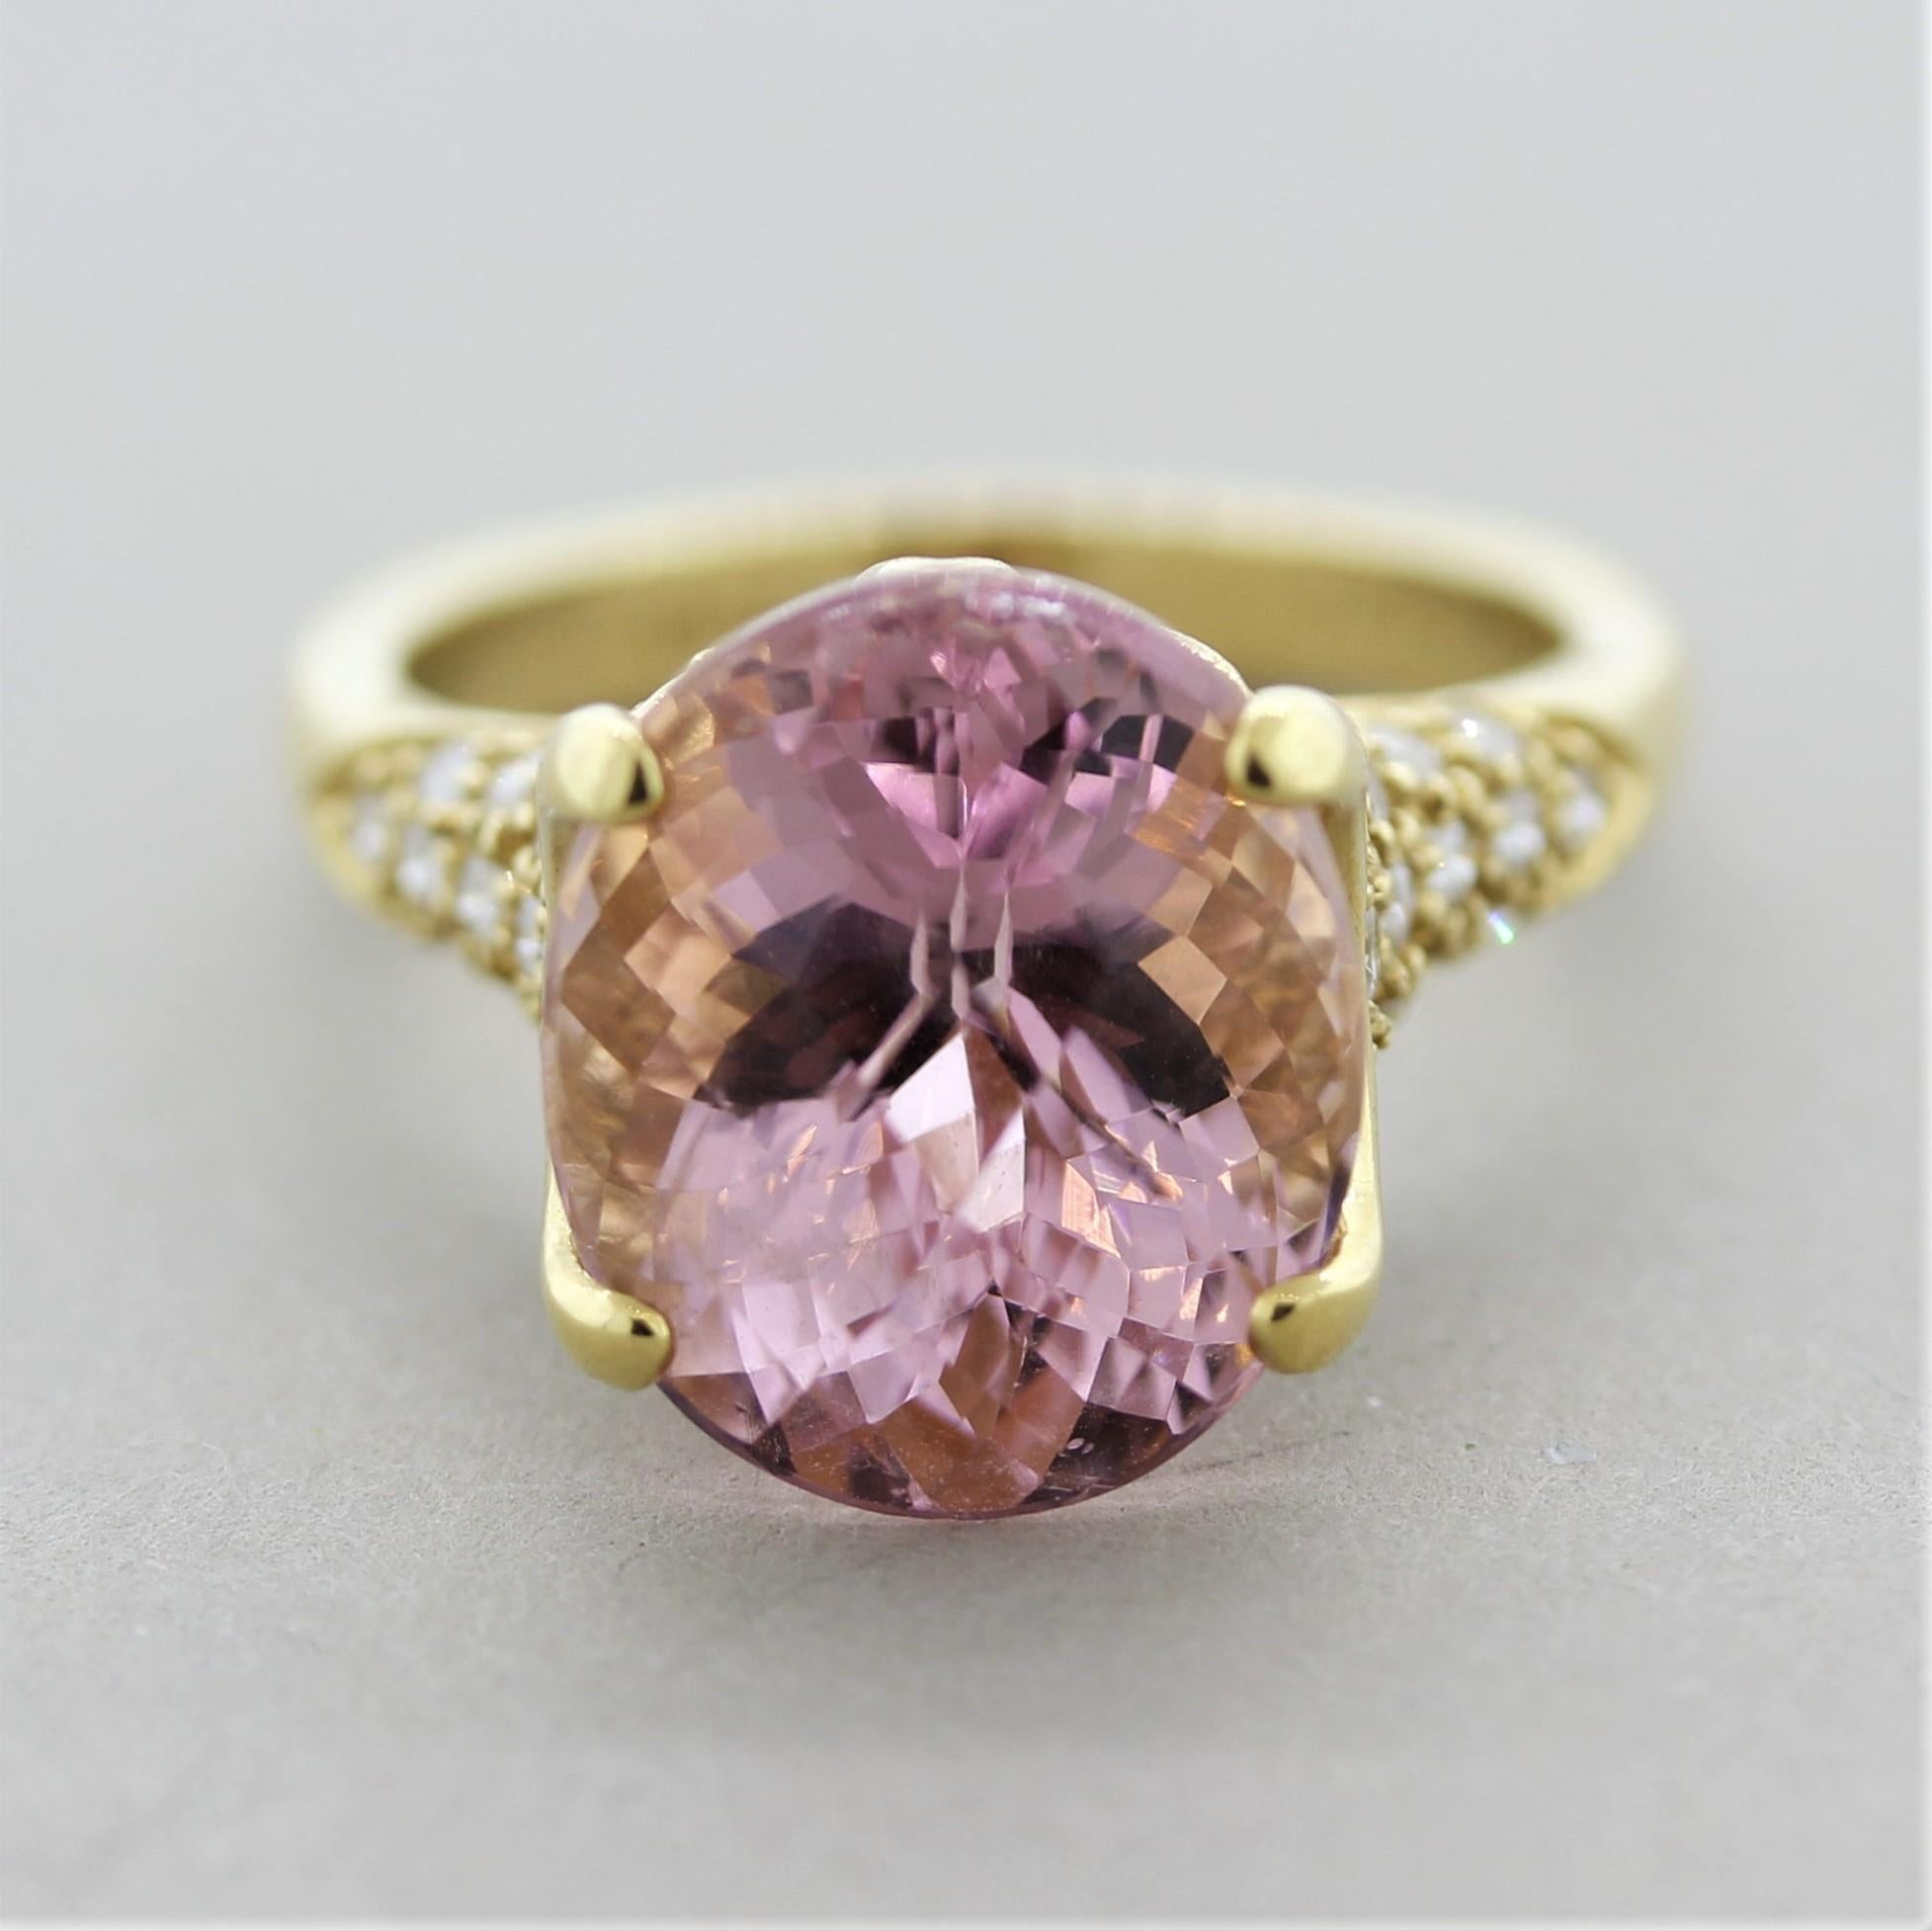 A sleek and sexy ring featuring a 9.90 carat rose cut tourmaline. It has a bright pleasant pink color and is free of any eye-visible inclusions. It is accented by 0.51 carats of round brilliant-cut diamonds set on the shoulders of the ring as well